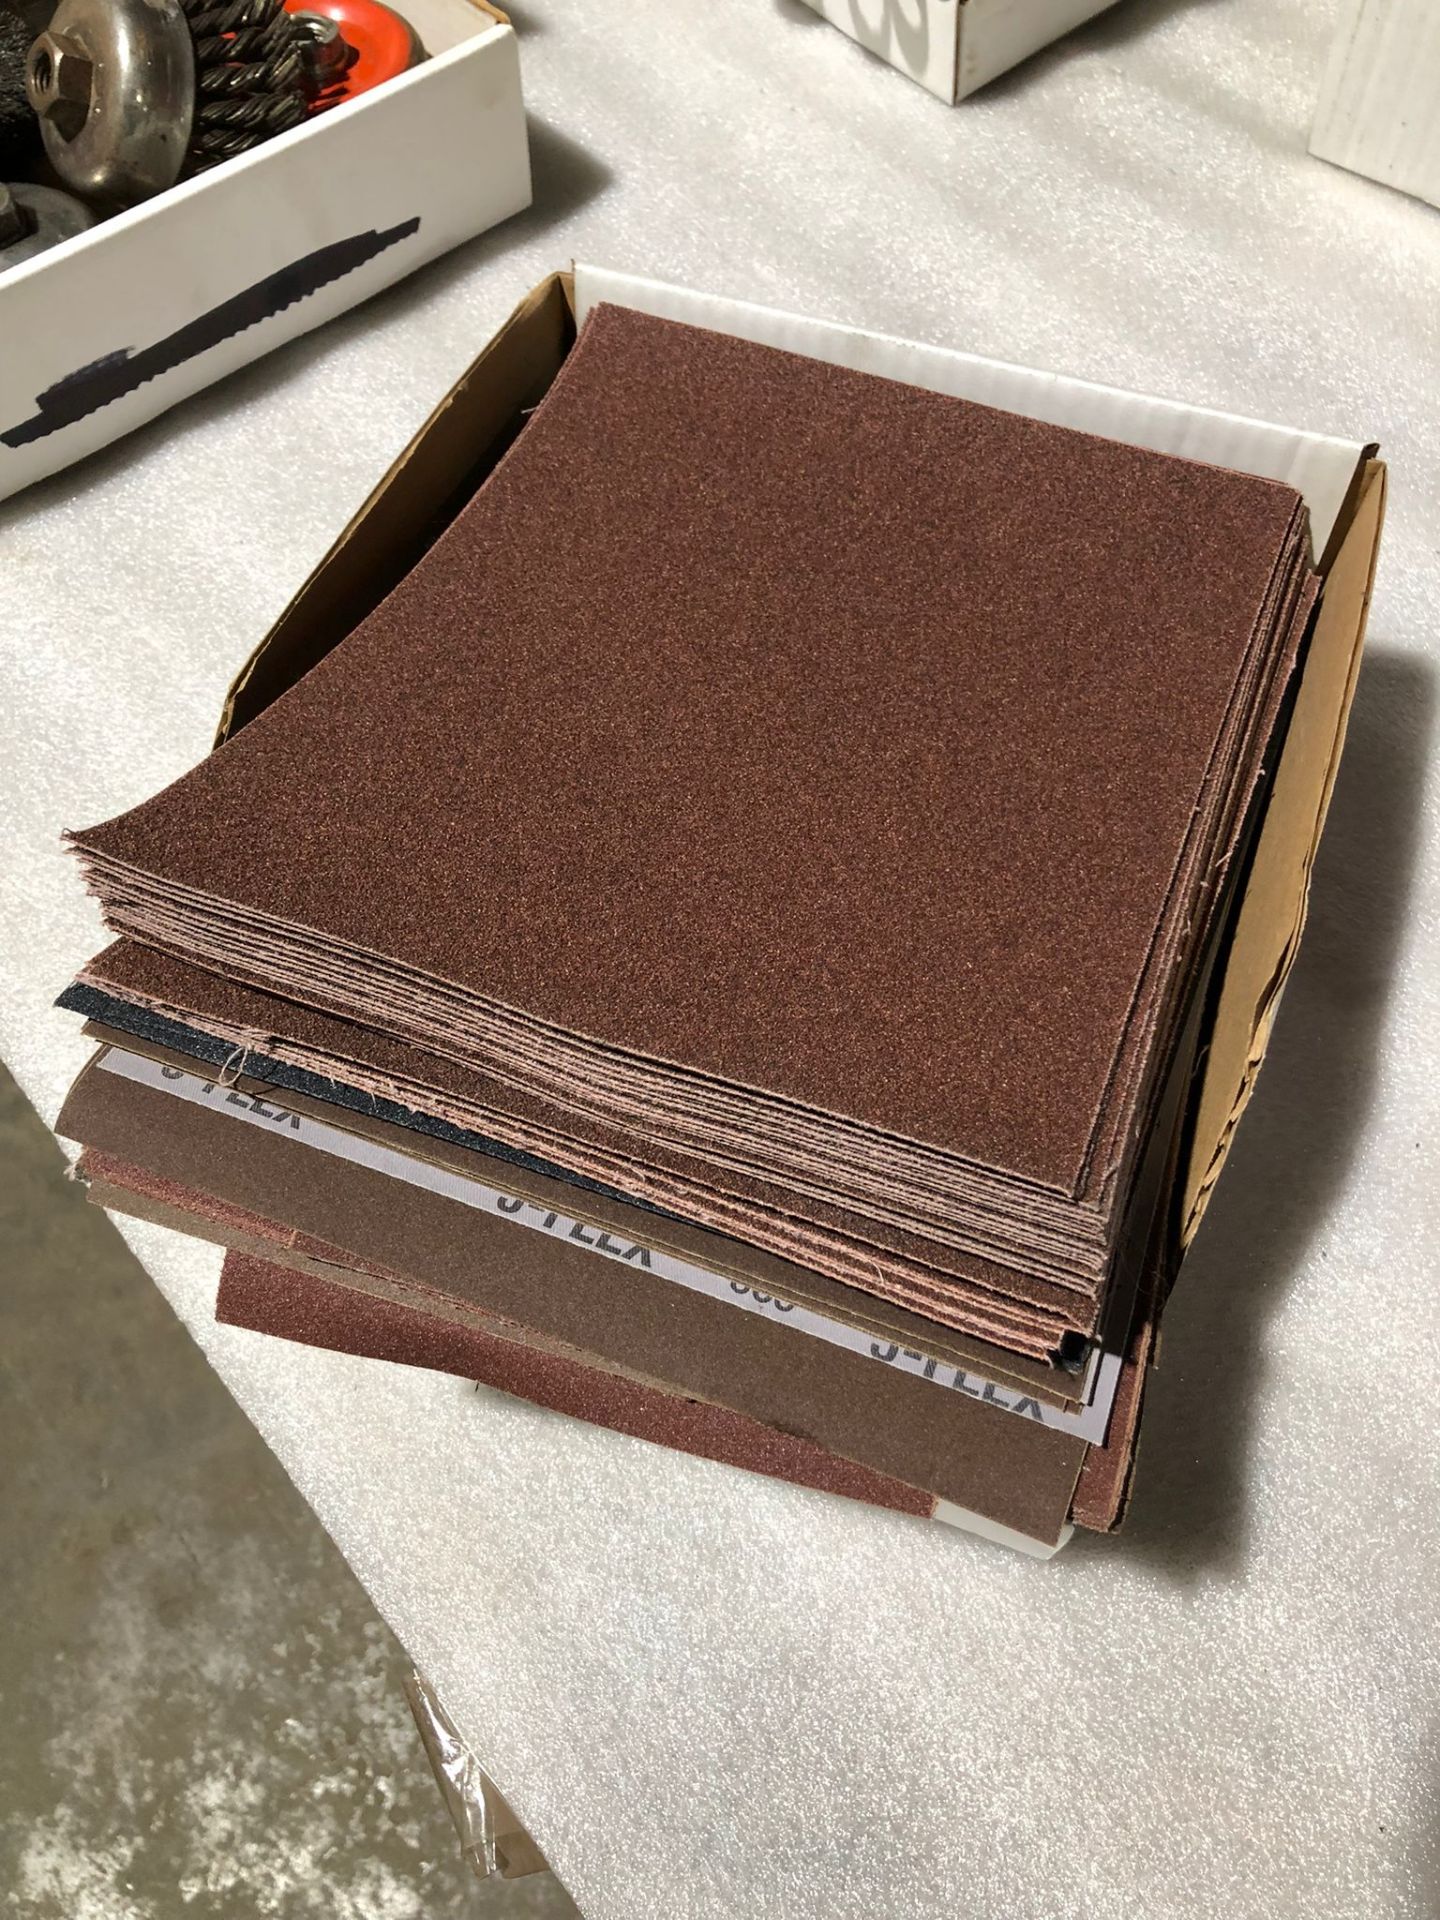 Lot of Sand Paper units - Approximately 100 Sheets